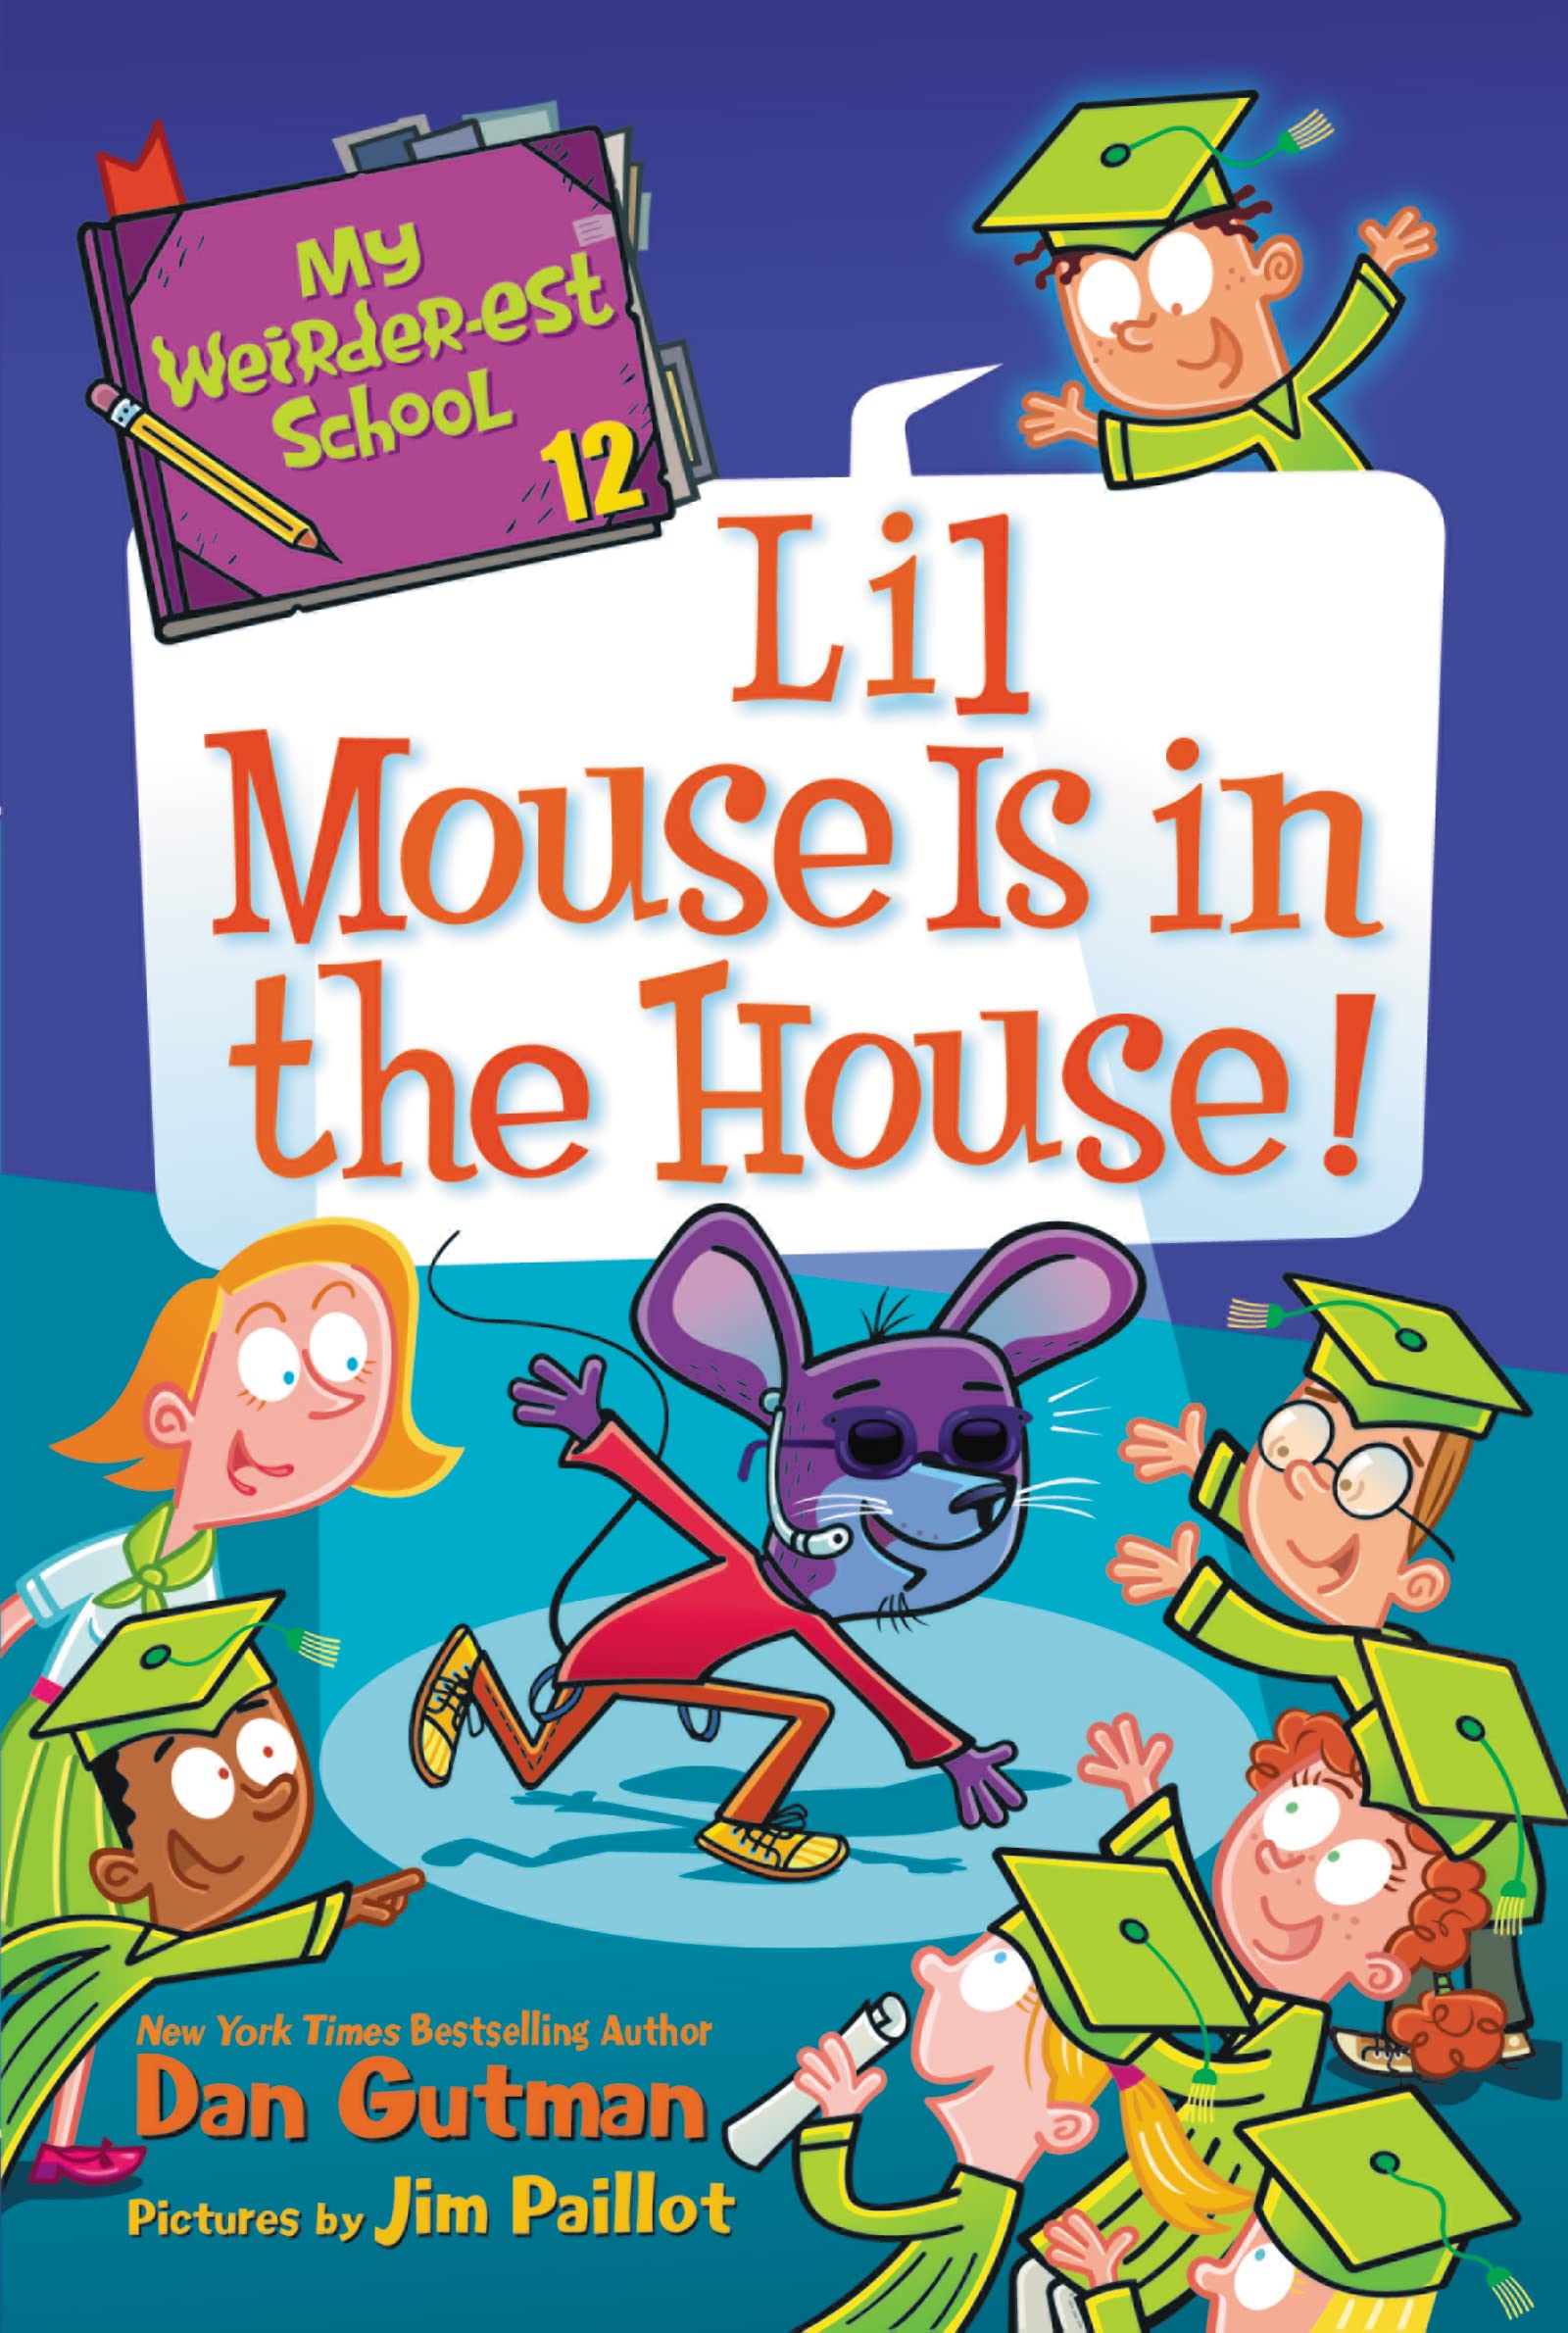 My Weirder-est School #12: Lil Mouse Is in the House! (Paperback)